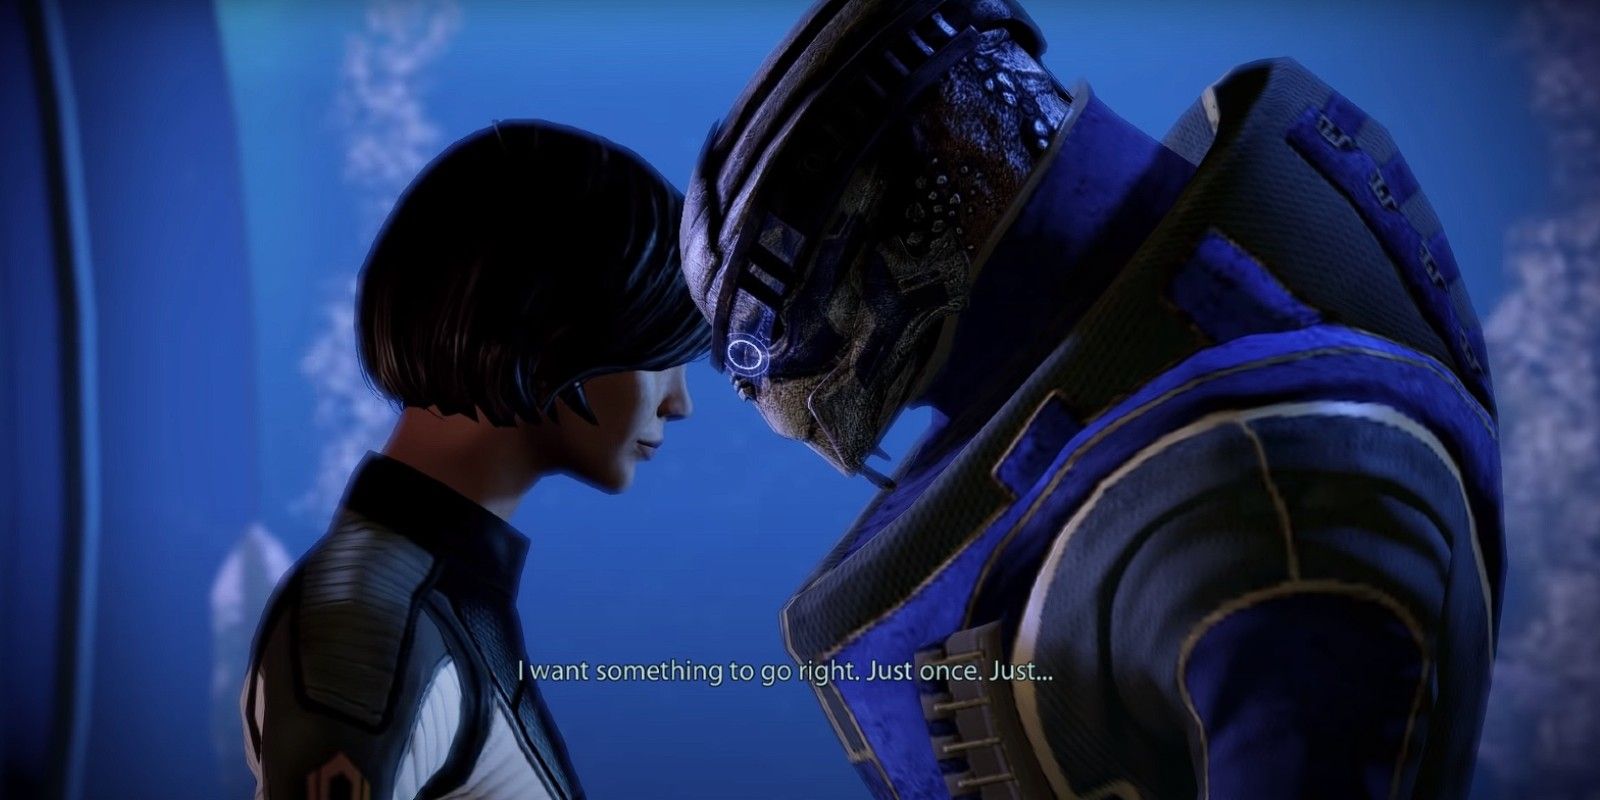 Garrus and Shepard share an intimate moment before the Suicide Mission in Mass Effect 2